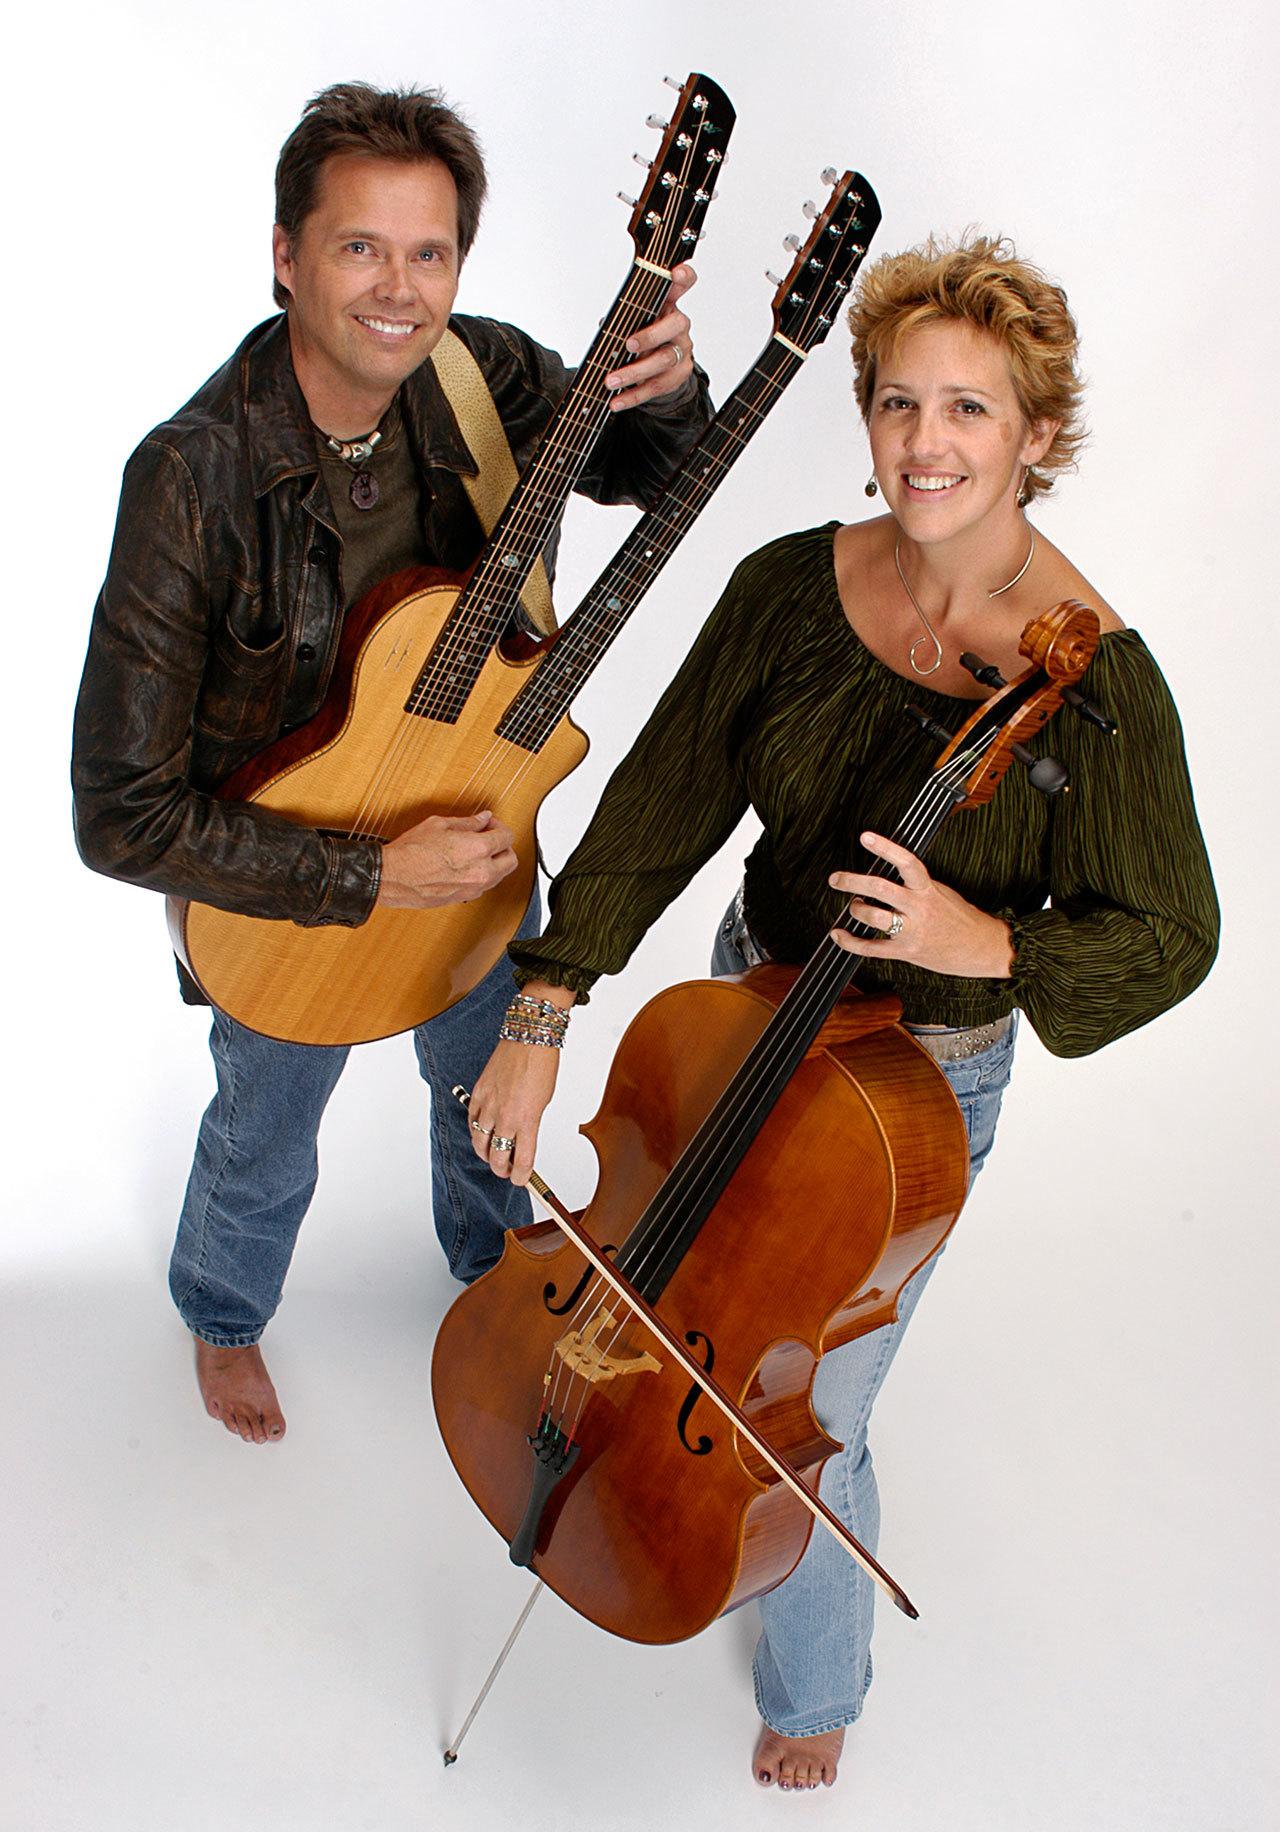 Acoustic Eidolon, a musical duo consisting of cellist Hanna Alkire and guitjo player Joe Scott, will perform Saturday at thePort Ludlow Bay Club, 120 Spinnaker Place. The show begins at 7:30 p.m. — Mark Sims.